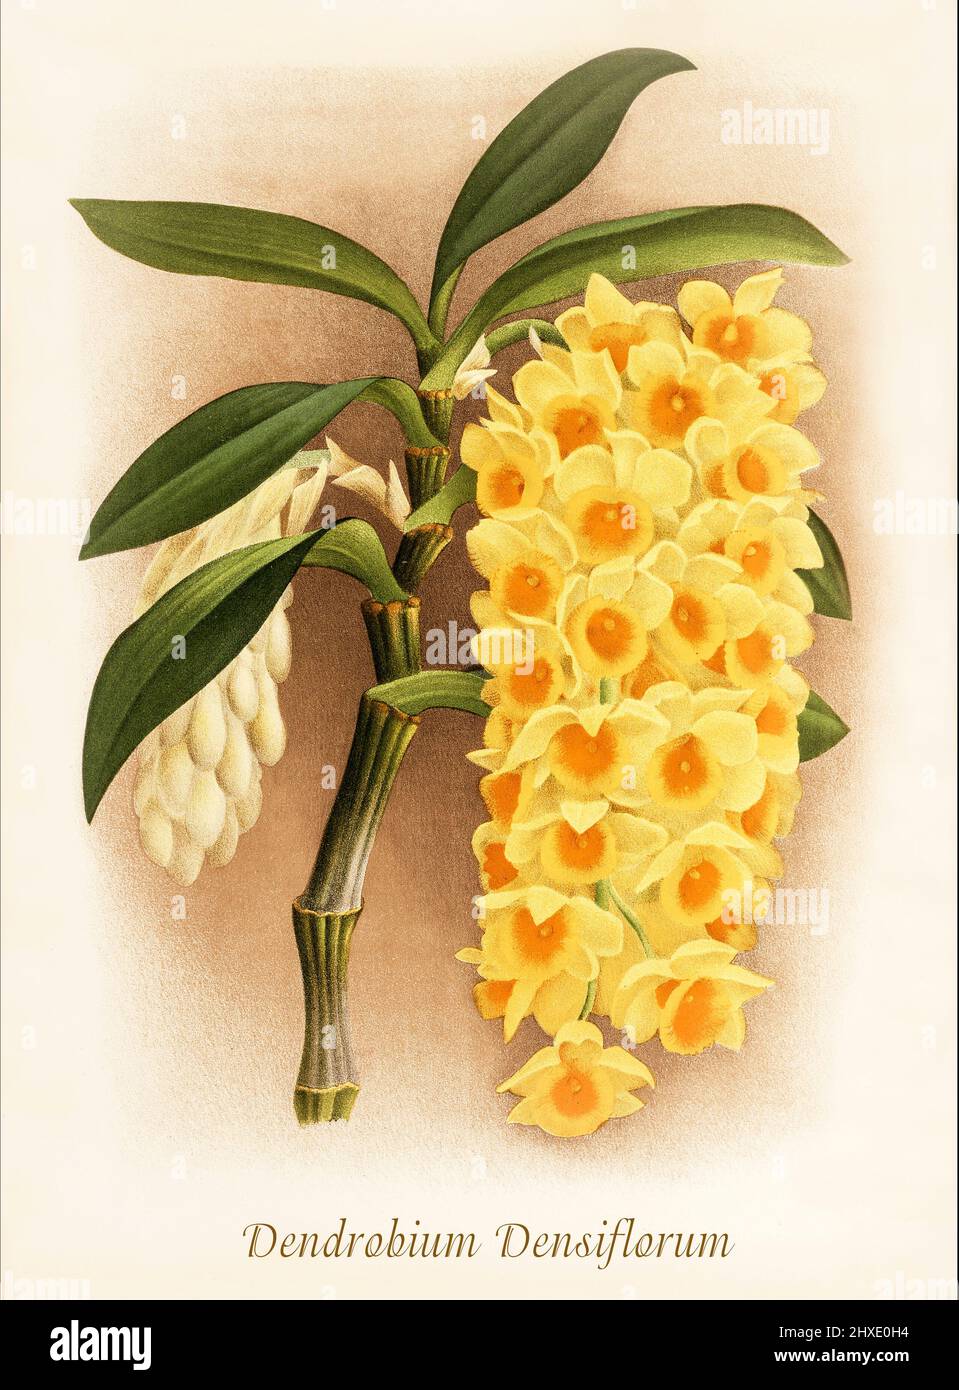 Dendrobium densiflorum is a species of epiphytic or lithophytic orchid, growing in the trunks of broadleaved, evergreen trees and on rocks in mountain valleys at elevations between 400 and 1,000 m (1,000 and 3,000 ft). It is found in China, Bhutan, northeastern India, Myanmar, Nepal and Thailand. From Iconographie des Orchidees, a magazine of botanical illustrations published by Jean Jules Linden (1817-1898) was a Belgian botanist, explorer and horticulturist who specialised in orchids. Stock Photo